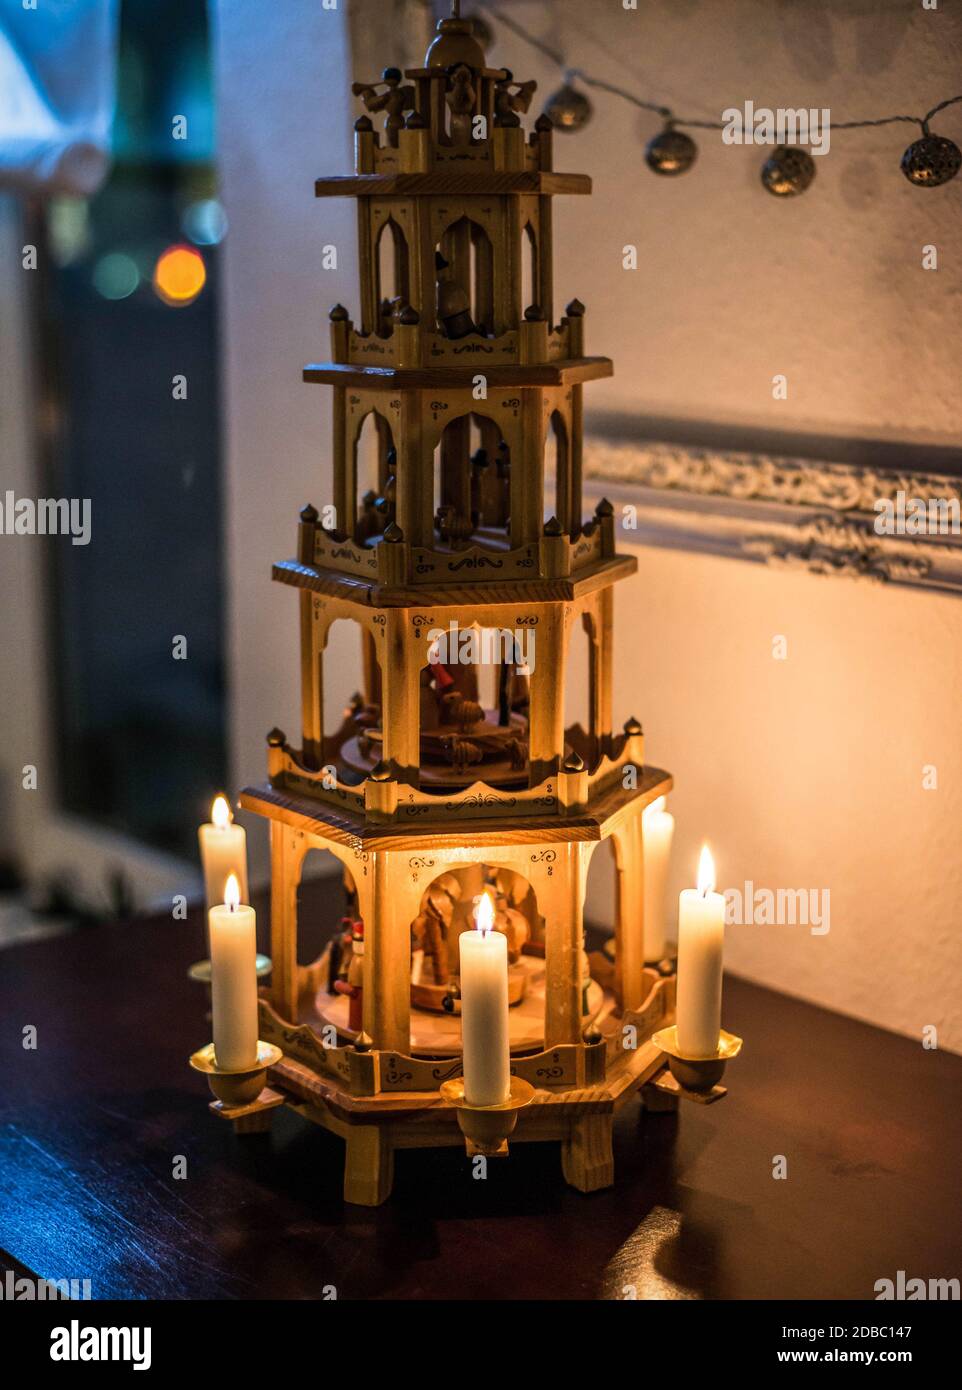 Traditional Christmas decoration. Candles burning on a wooden Christmas carousel with nativity scene and wood sculptural Christmas characters. Stock Photo